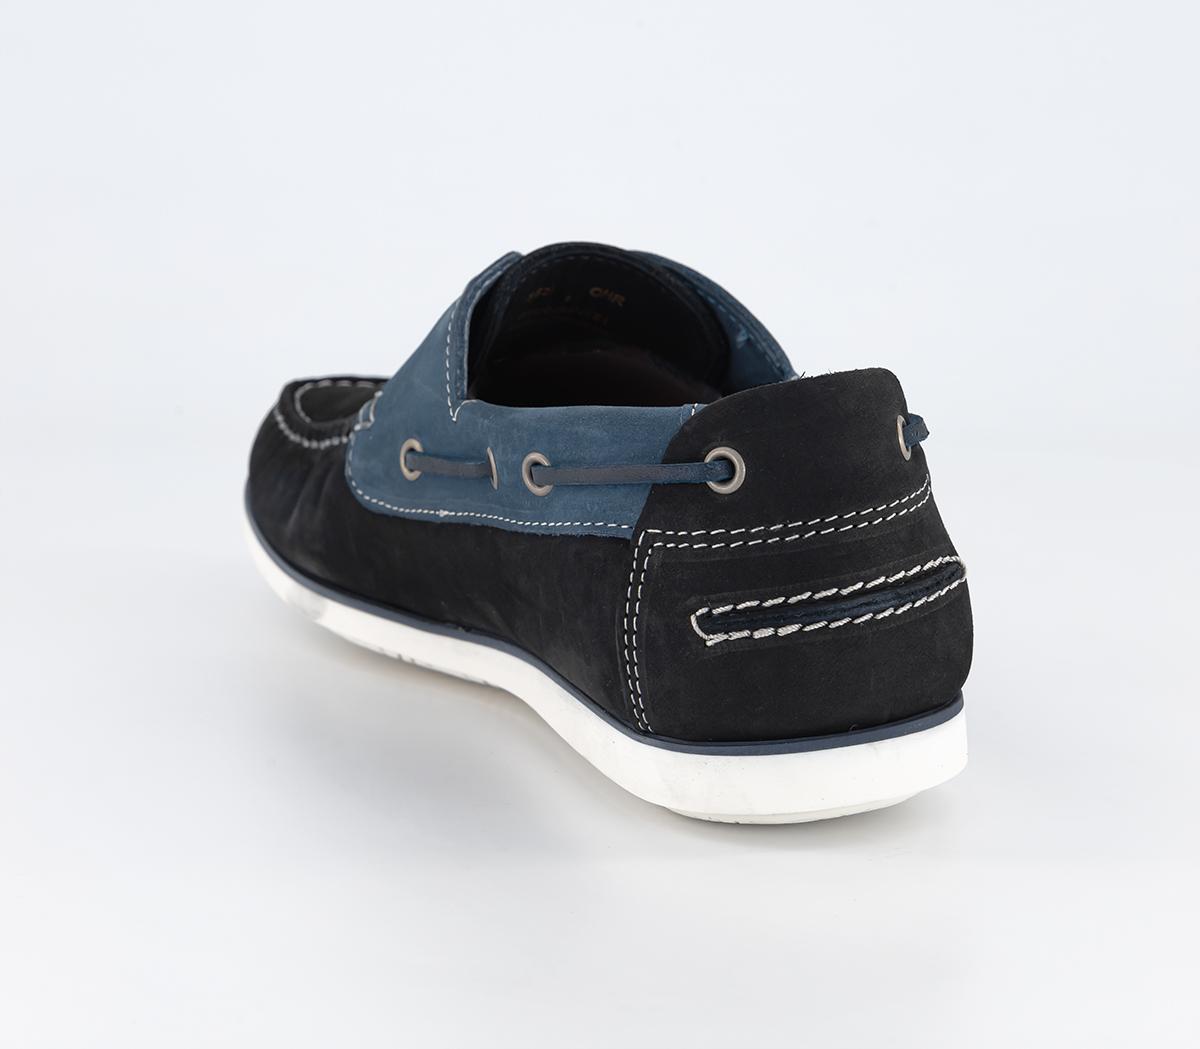 Barbour Barbour Wake Shoes Washed Blue - Boat Shoes